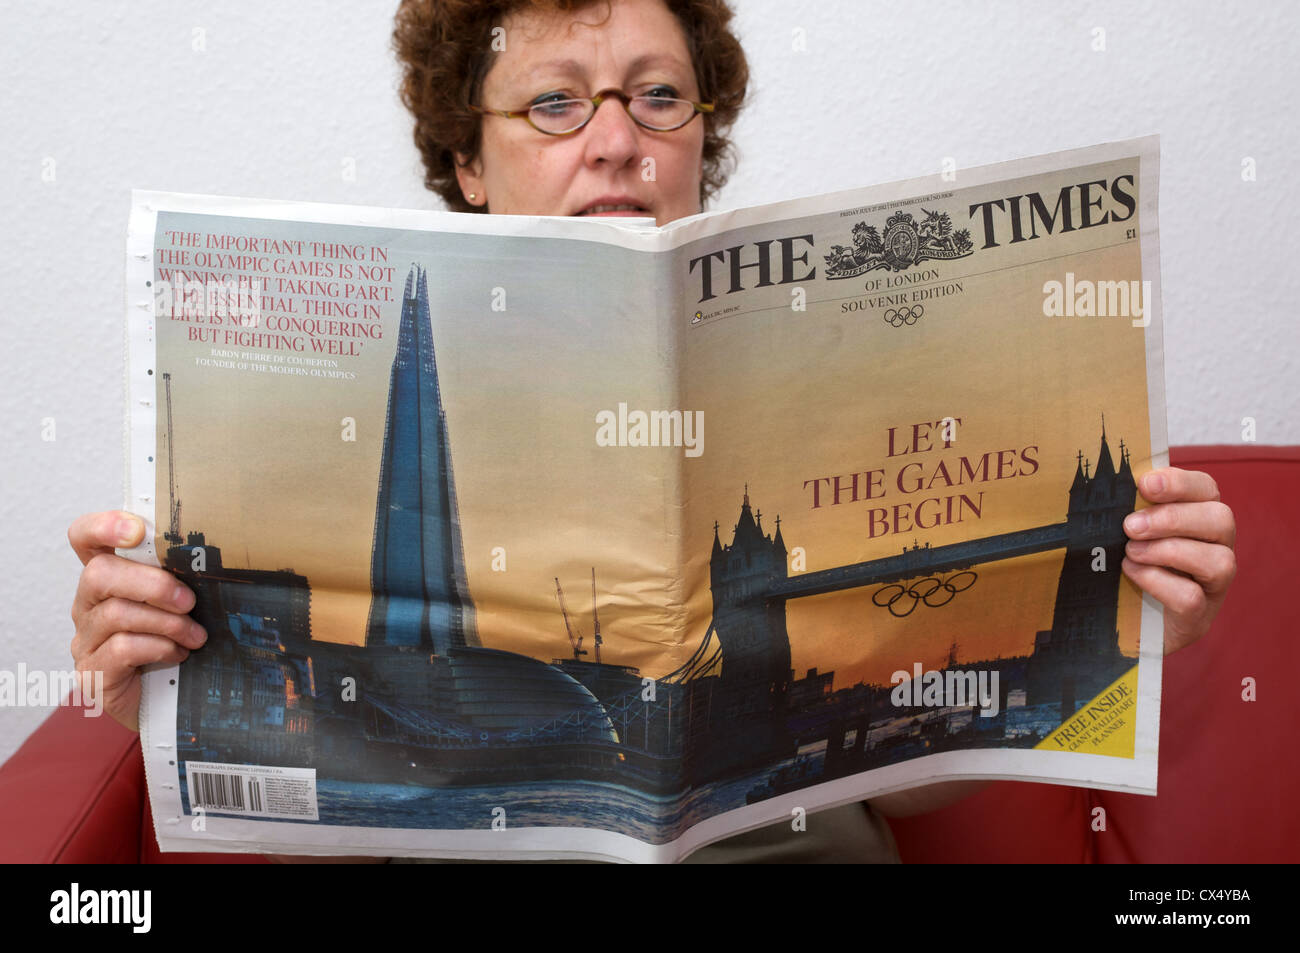 Woman reading The Times souvenir edition 'Let the games begin' headline Stock Photo